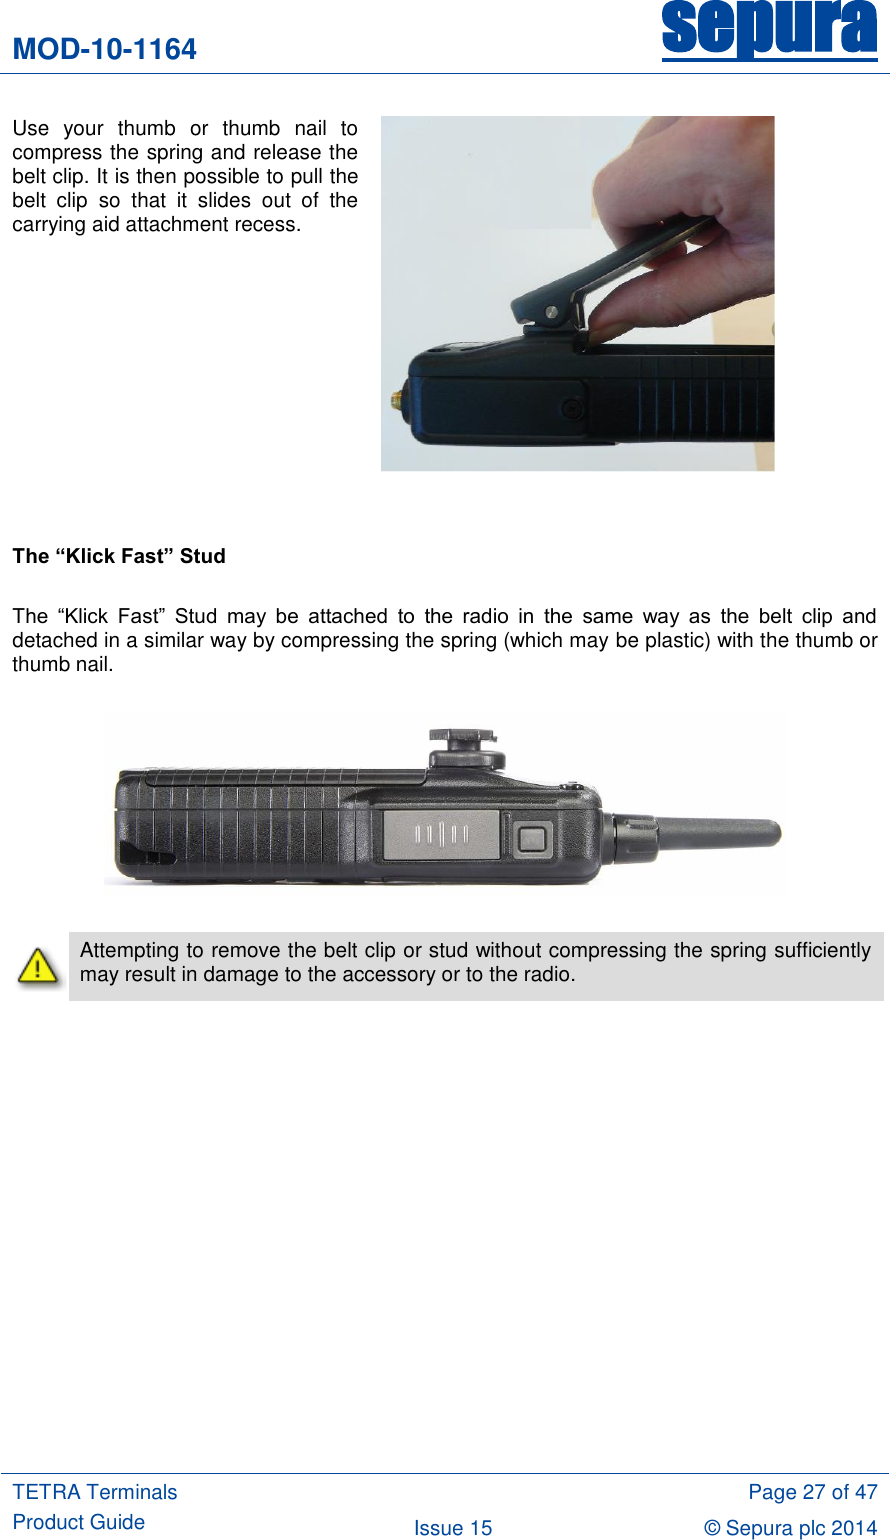 MOD-10-1164 sepura  TETRA Terminals Product Guide  Page 27 of 47 Issue 15 © Sepura plc 2014   Use  your  thumb  or  thumb  nail  to compress the spring and release the belt clip. It is then possible to pull the belt  clip  so  that  it  slides  out  of  the carrying aid attachment recess.      The “Klick Fast” Stud  The  “Klick  Fast”  Stud  may  be  attached  to  the  radio  in  the  same  way  as  the  belt  clip  and detached in a similar way by compressing the spring (which may be plastic) with the thumb or thumb nail.      Attempting to remove the belt clip or stud without compressing the spring sufficiently may result in damage to the accessory or to the radio. 